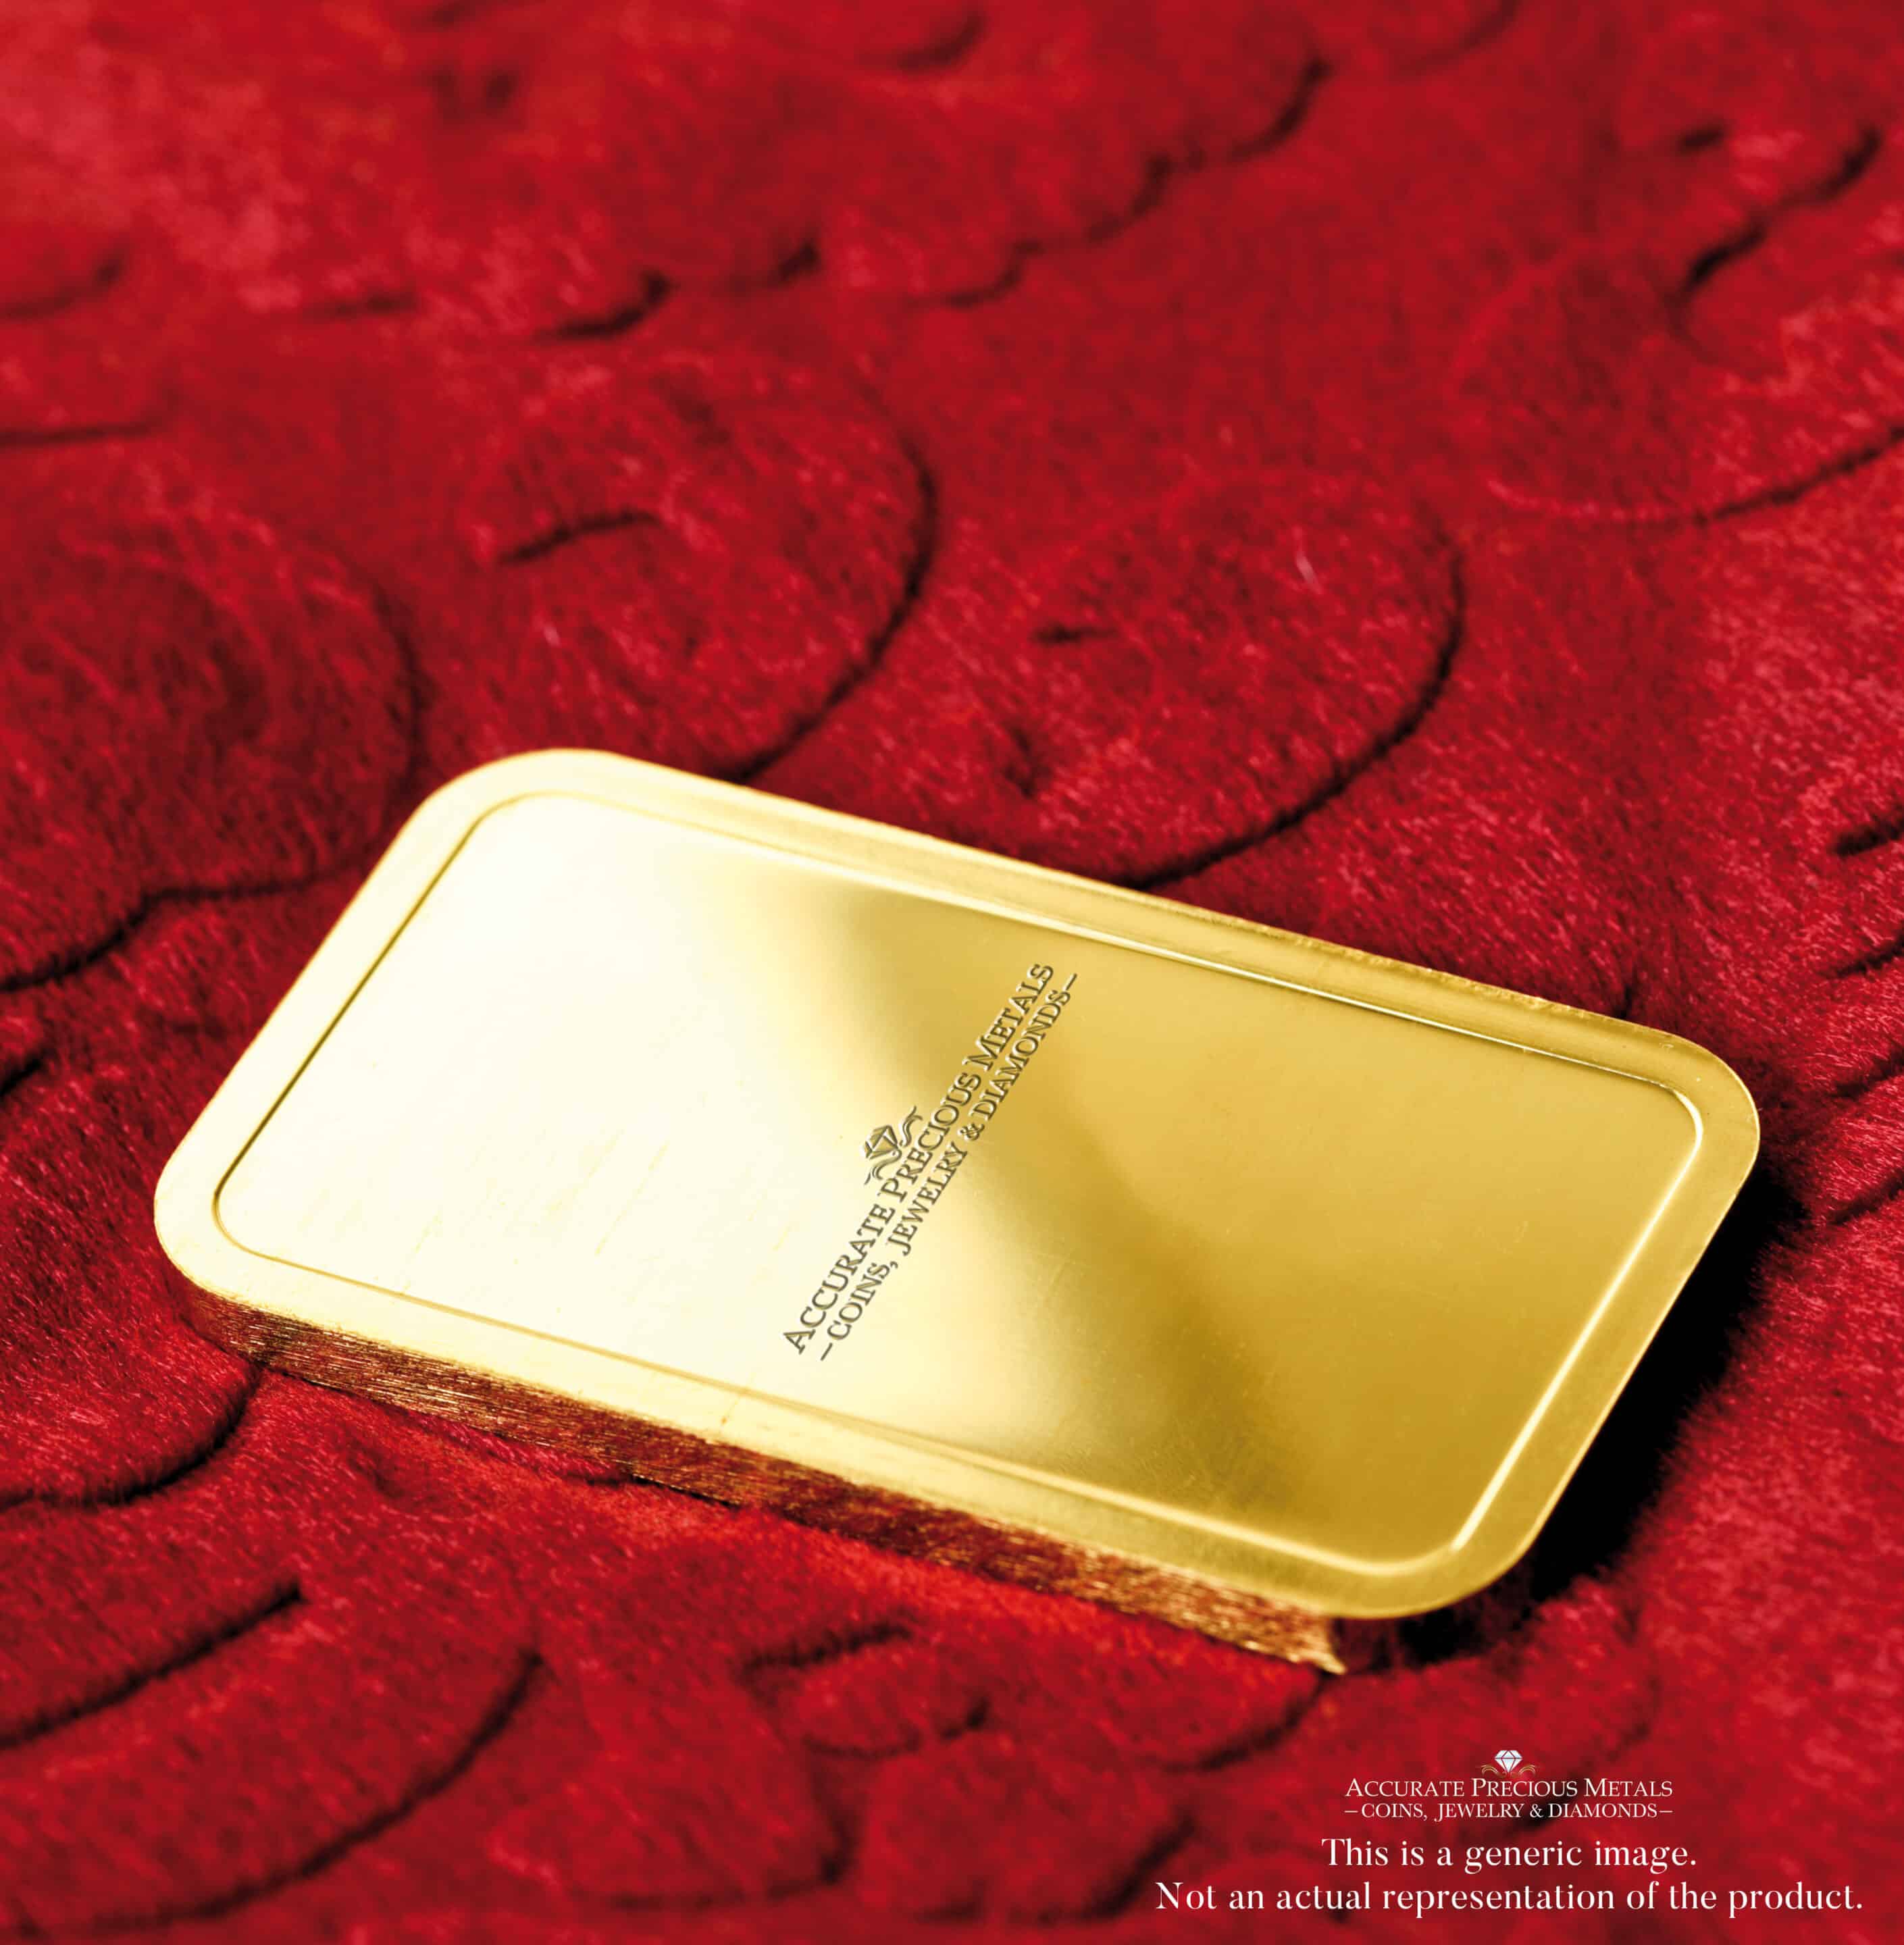 Invest with Confidence in Geiger Edelmetalle 1/4 oz Gold Bar - Trusted and Respected Worldwide